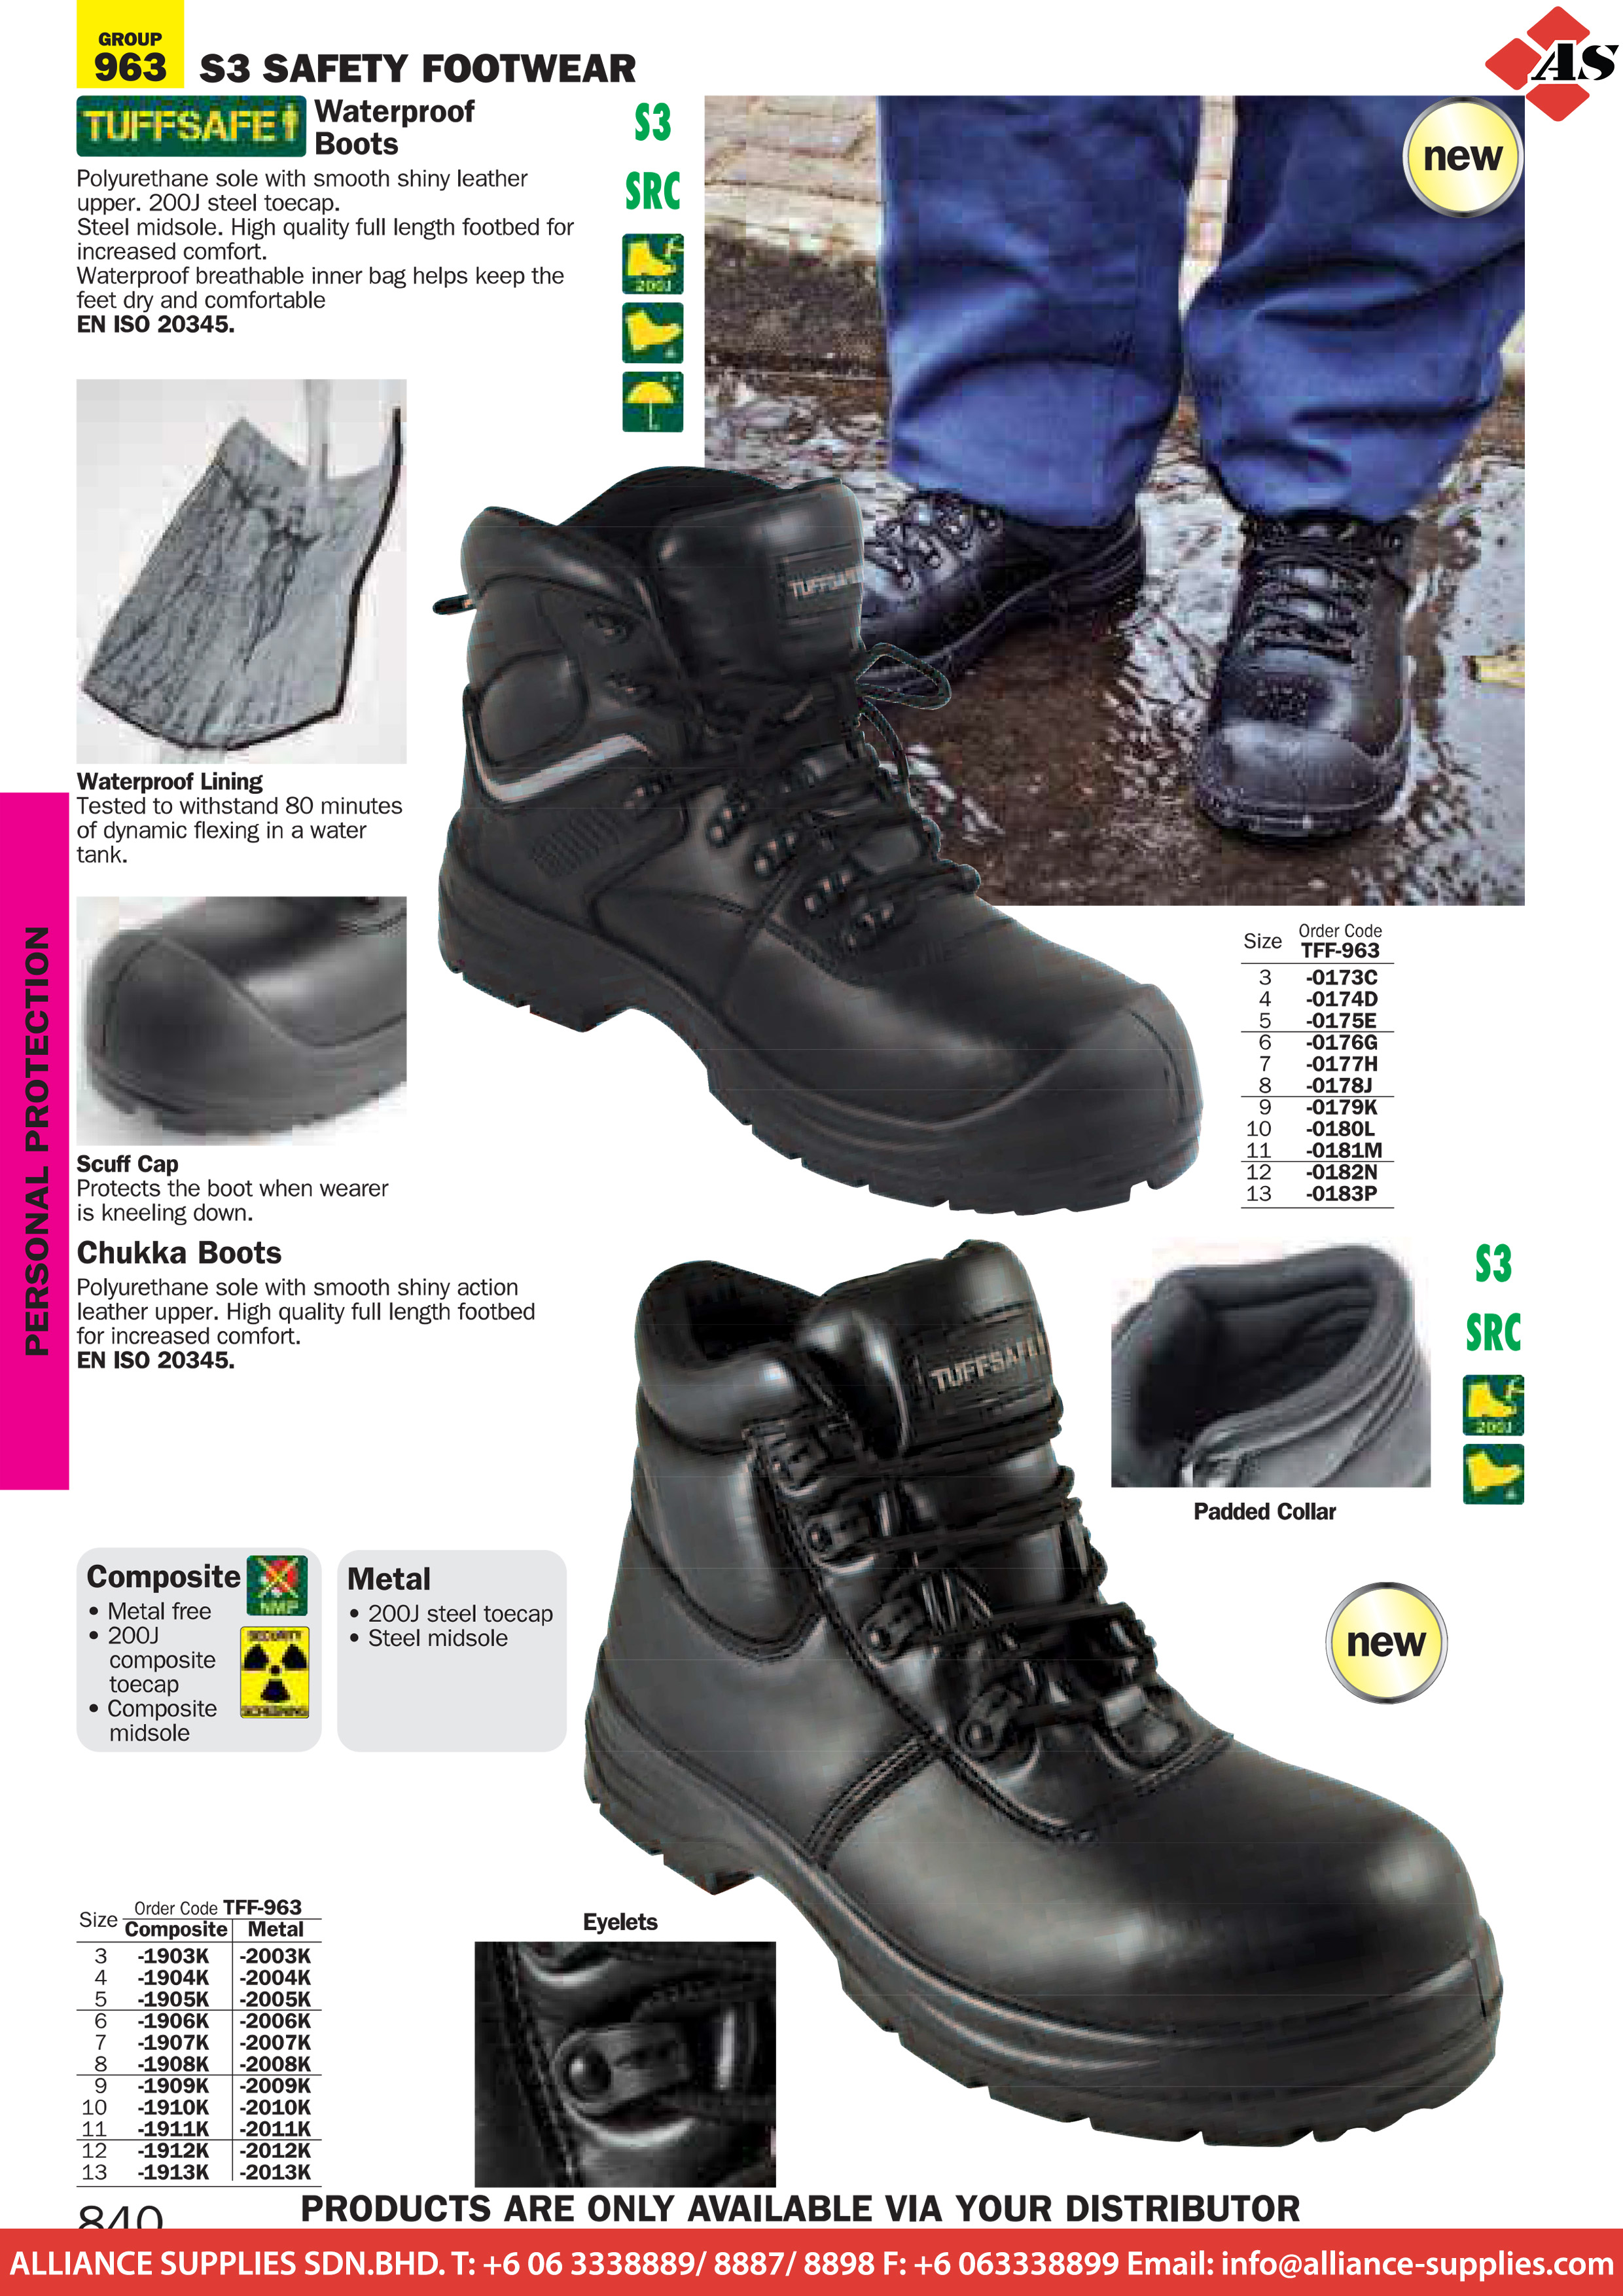 cromwell safety boots